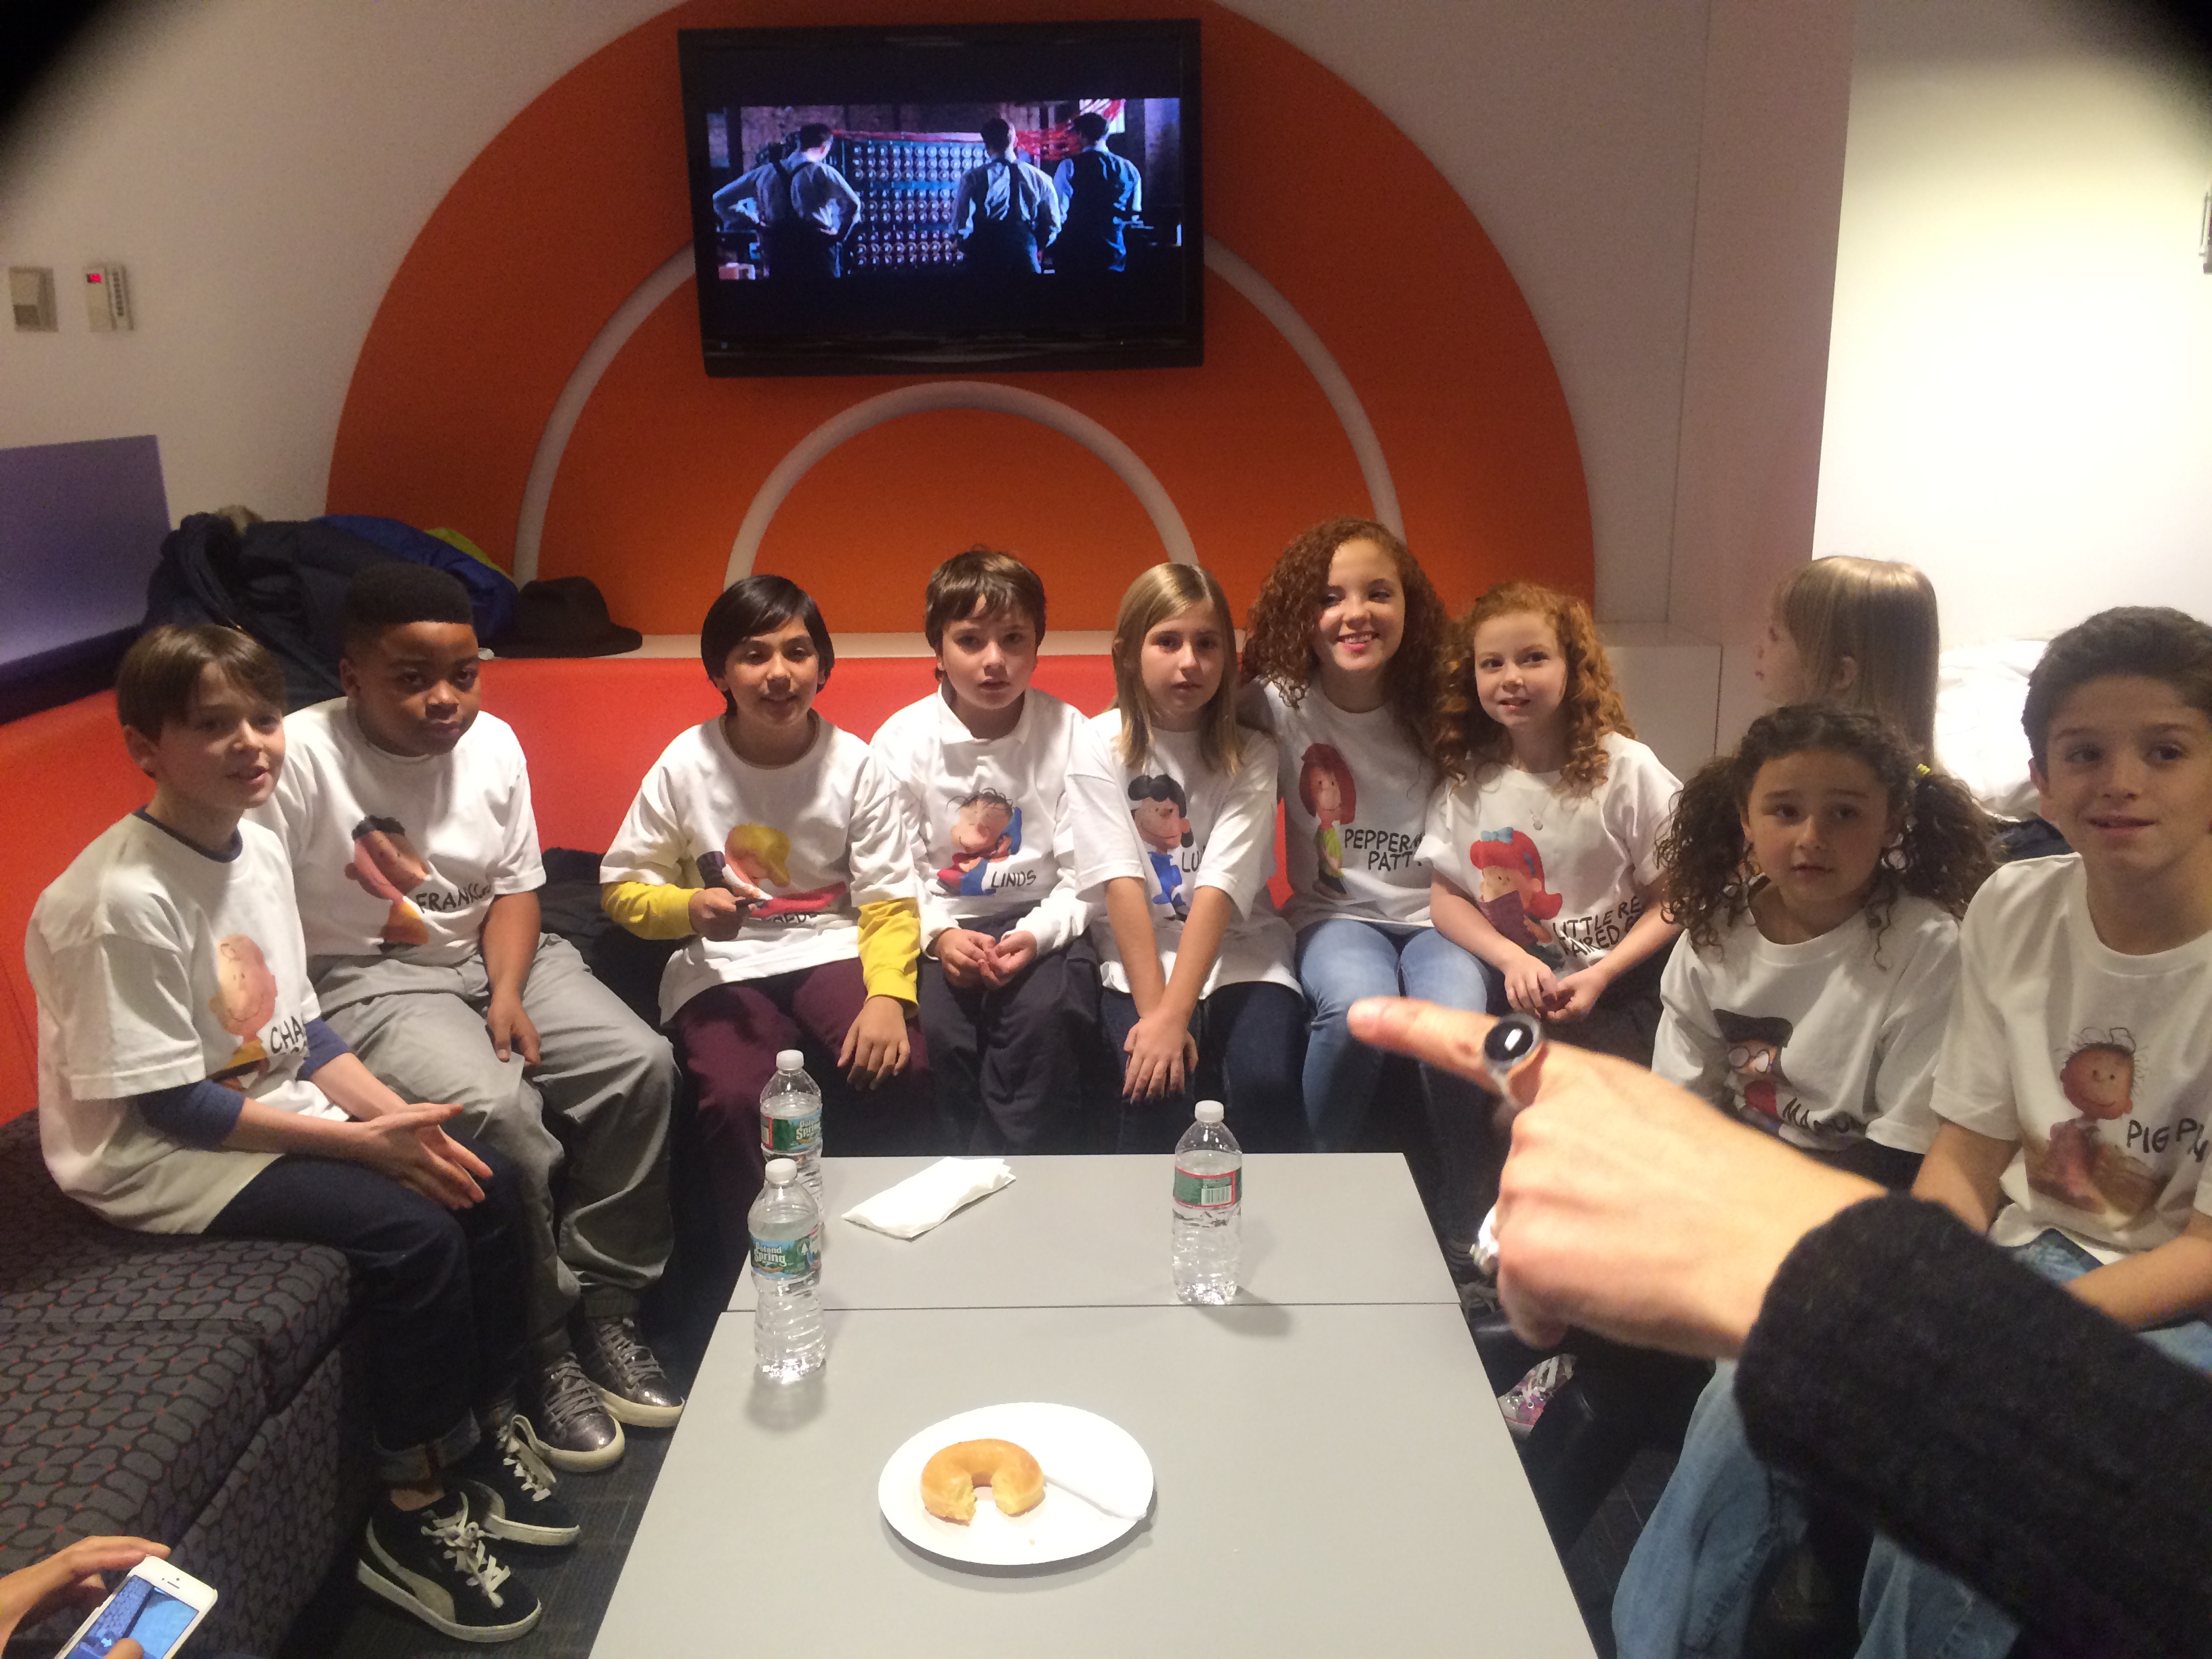 The 2015 Peanuts Gang waiting to appear on the Today Show, Thanksgiving Day 2014